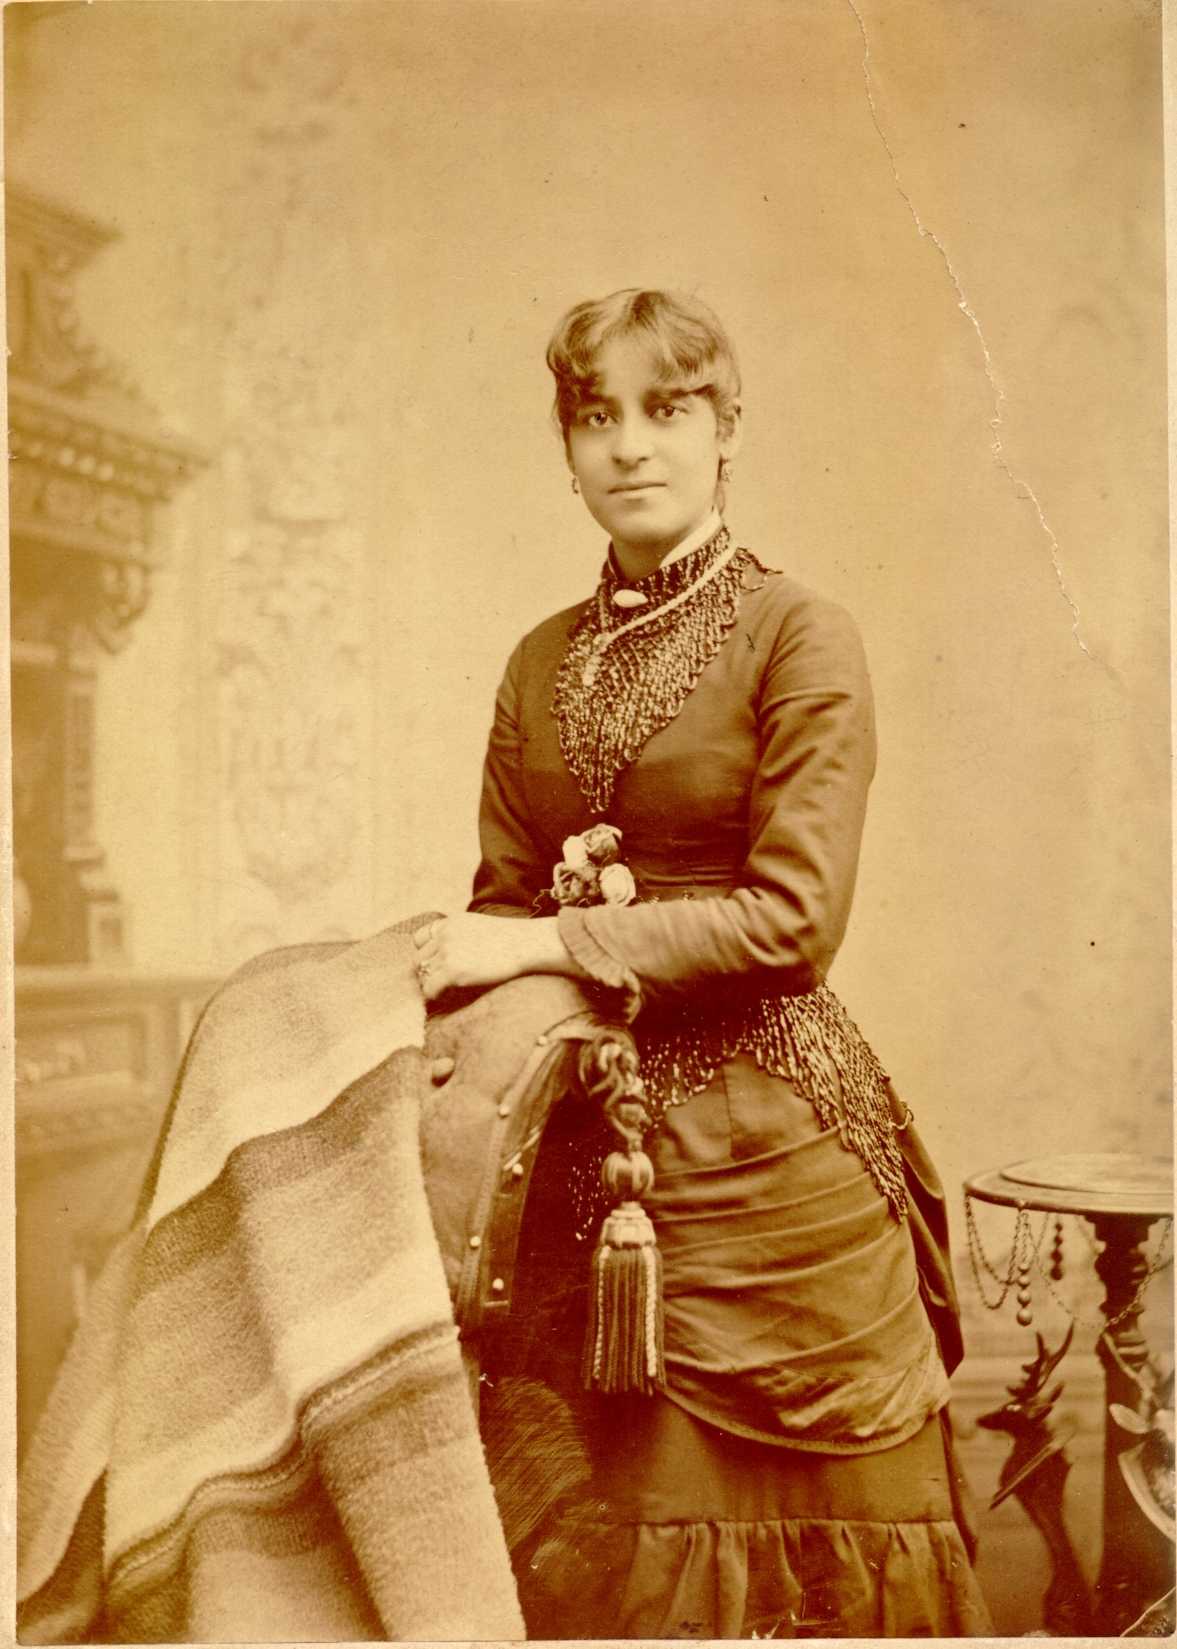 Photograph of young Maggie Lena Walker